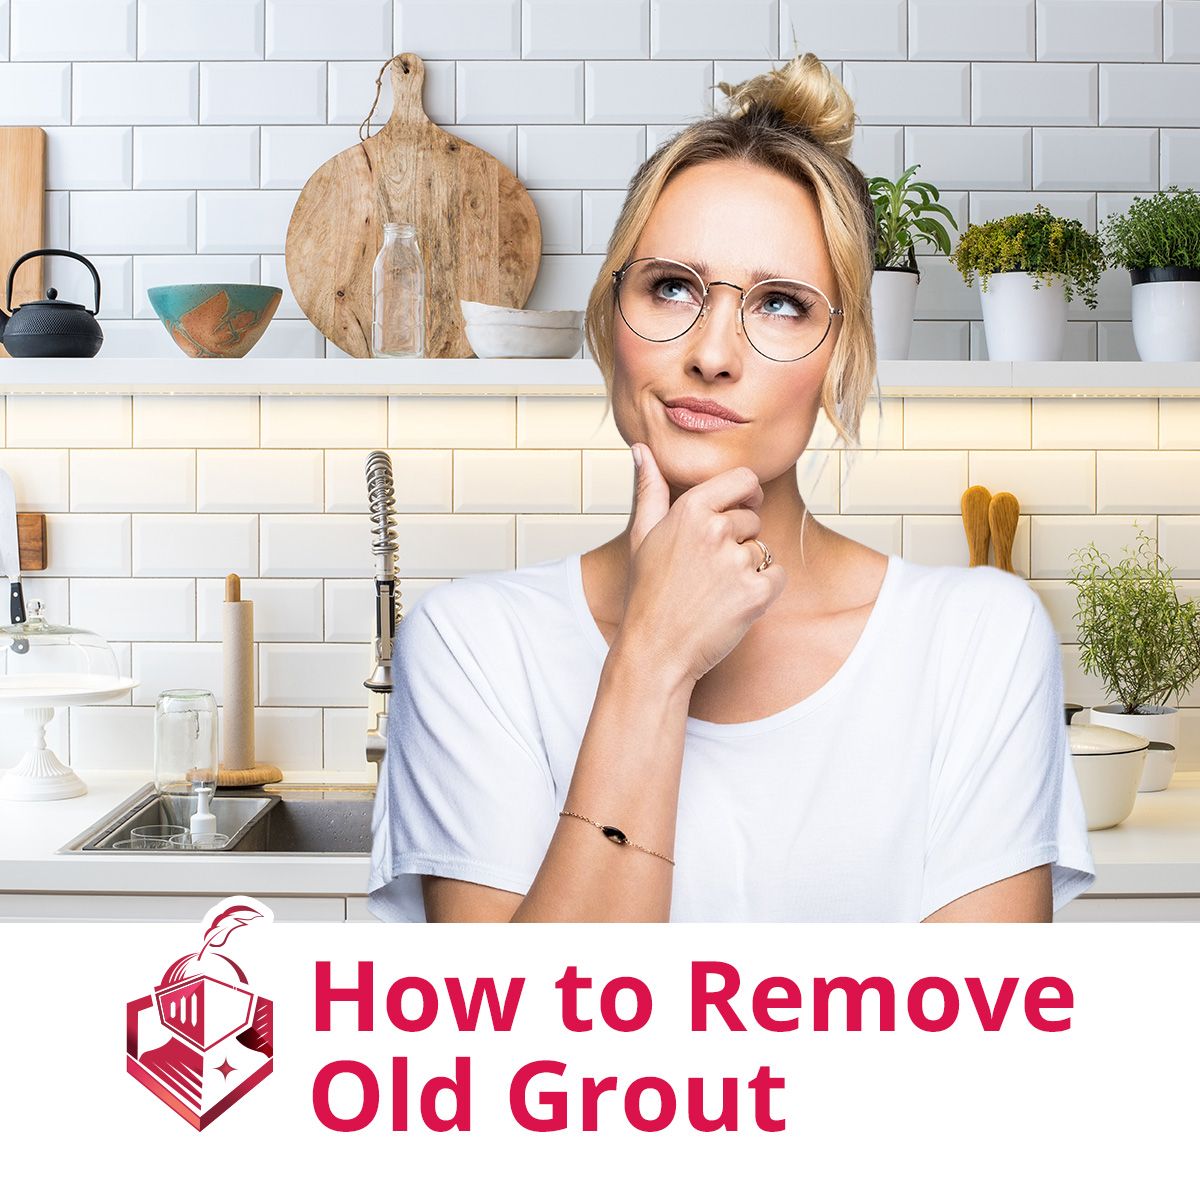 How to Remove Old Grout